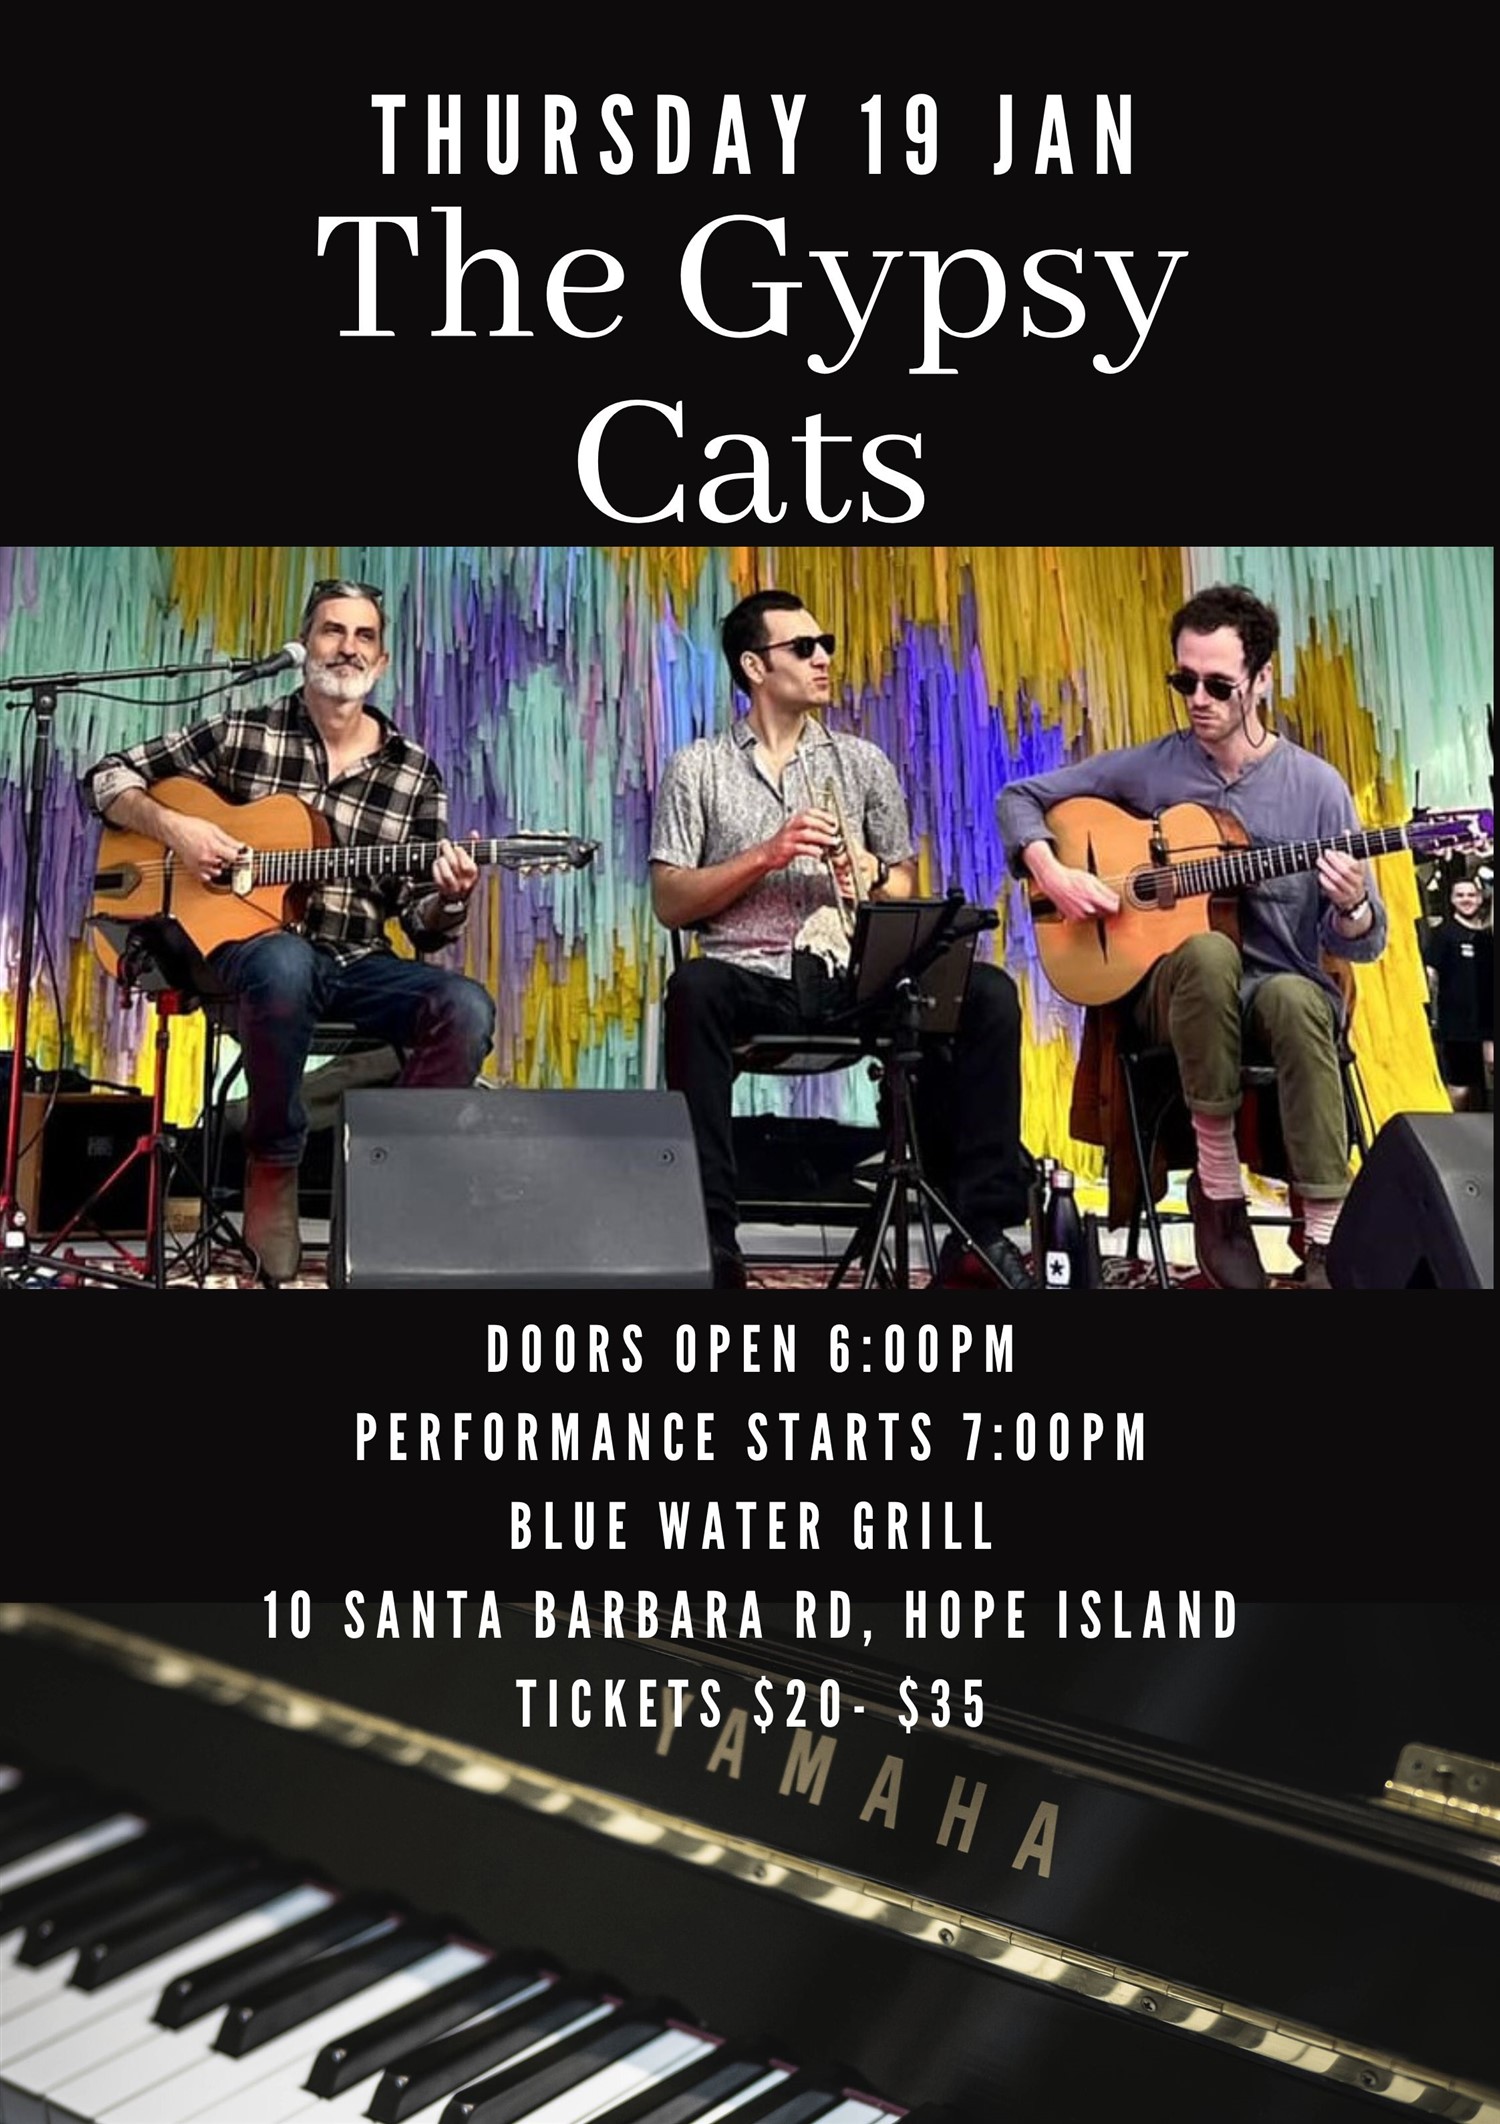 The Gypsy Cats  on Jan 19, 18:00@Hope Island Jazz - Blue Water Grill - Buy tickets and Get information on Hope Island Jazz hopeislandjazz.com.au